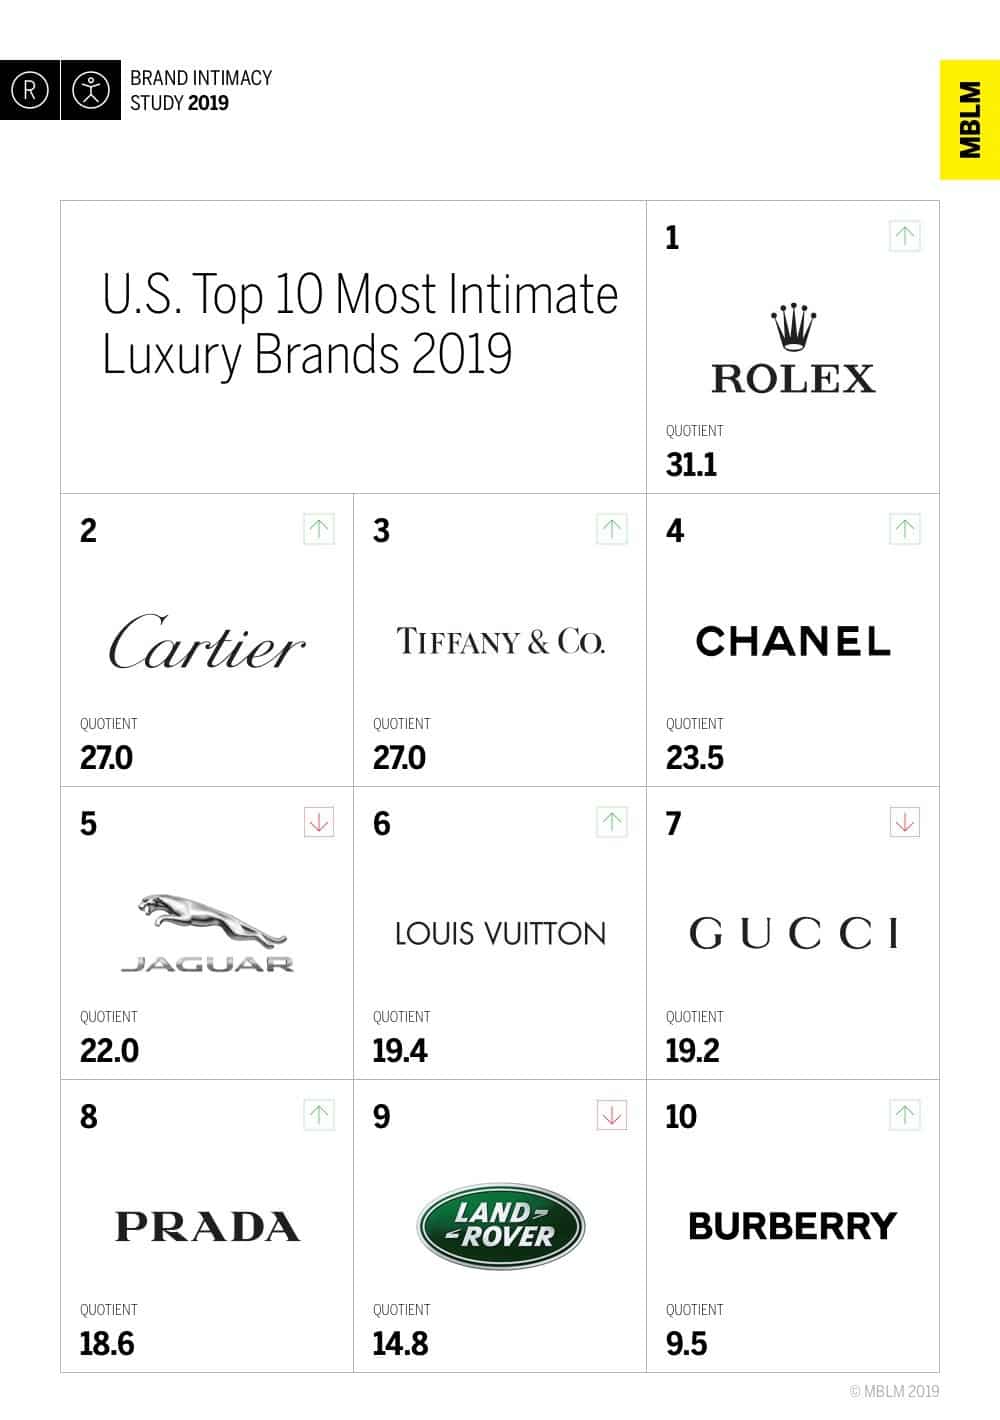 Luxury industry moves into the brand-intimacy basement